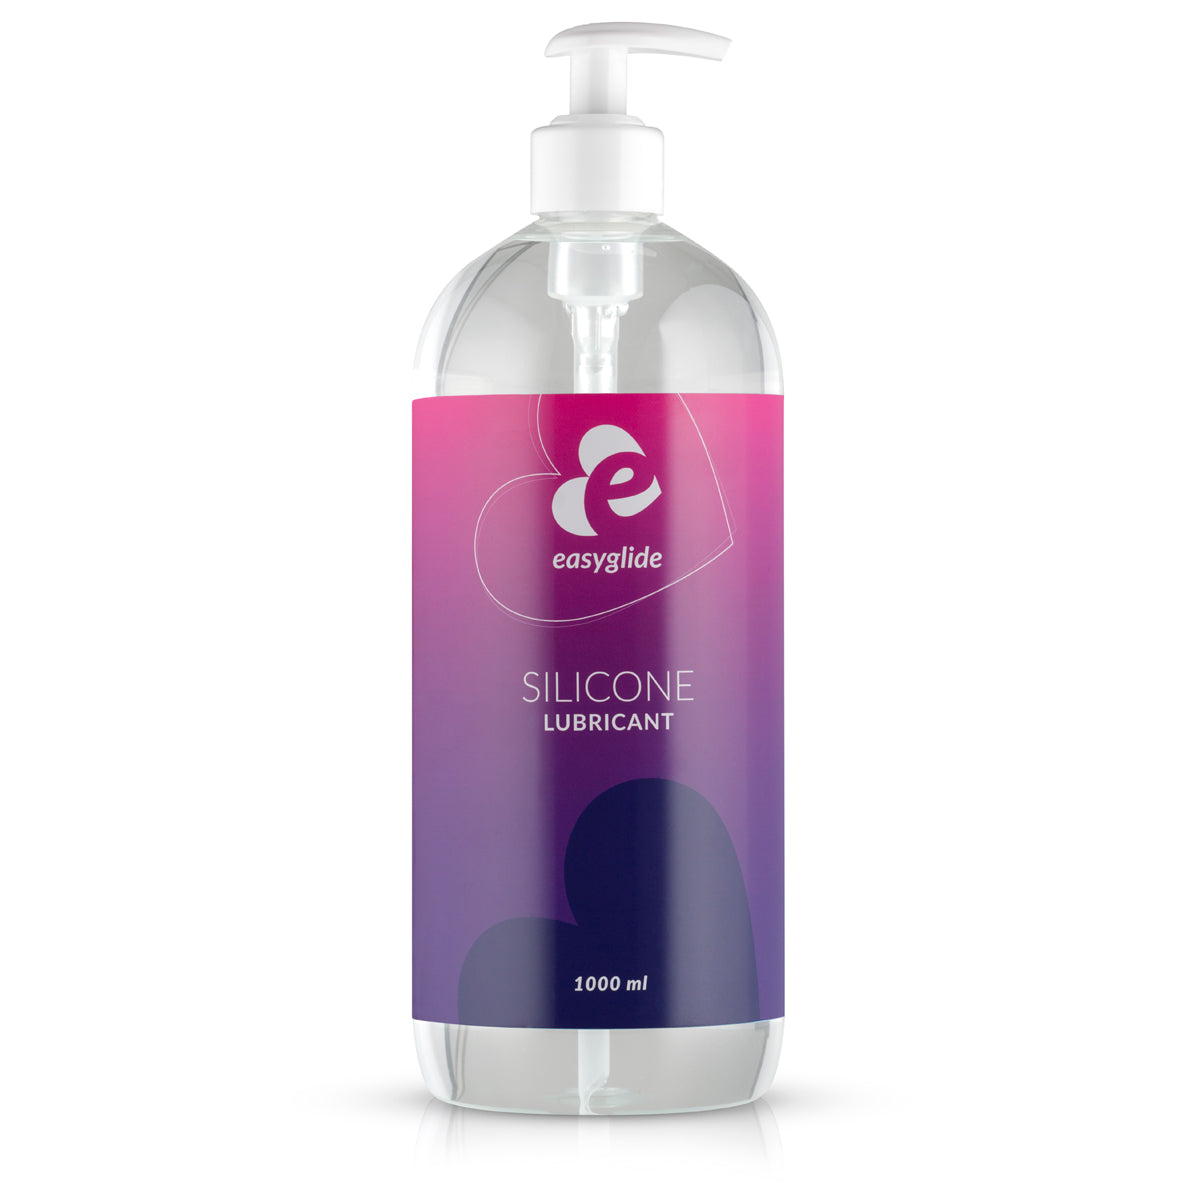 Easyglide Silicone Lubricant – 1000 ml